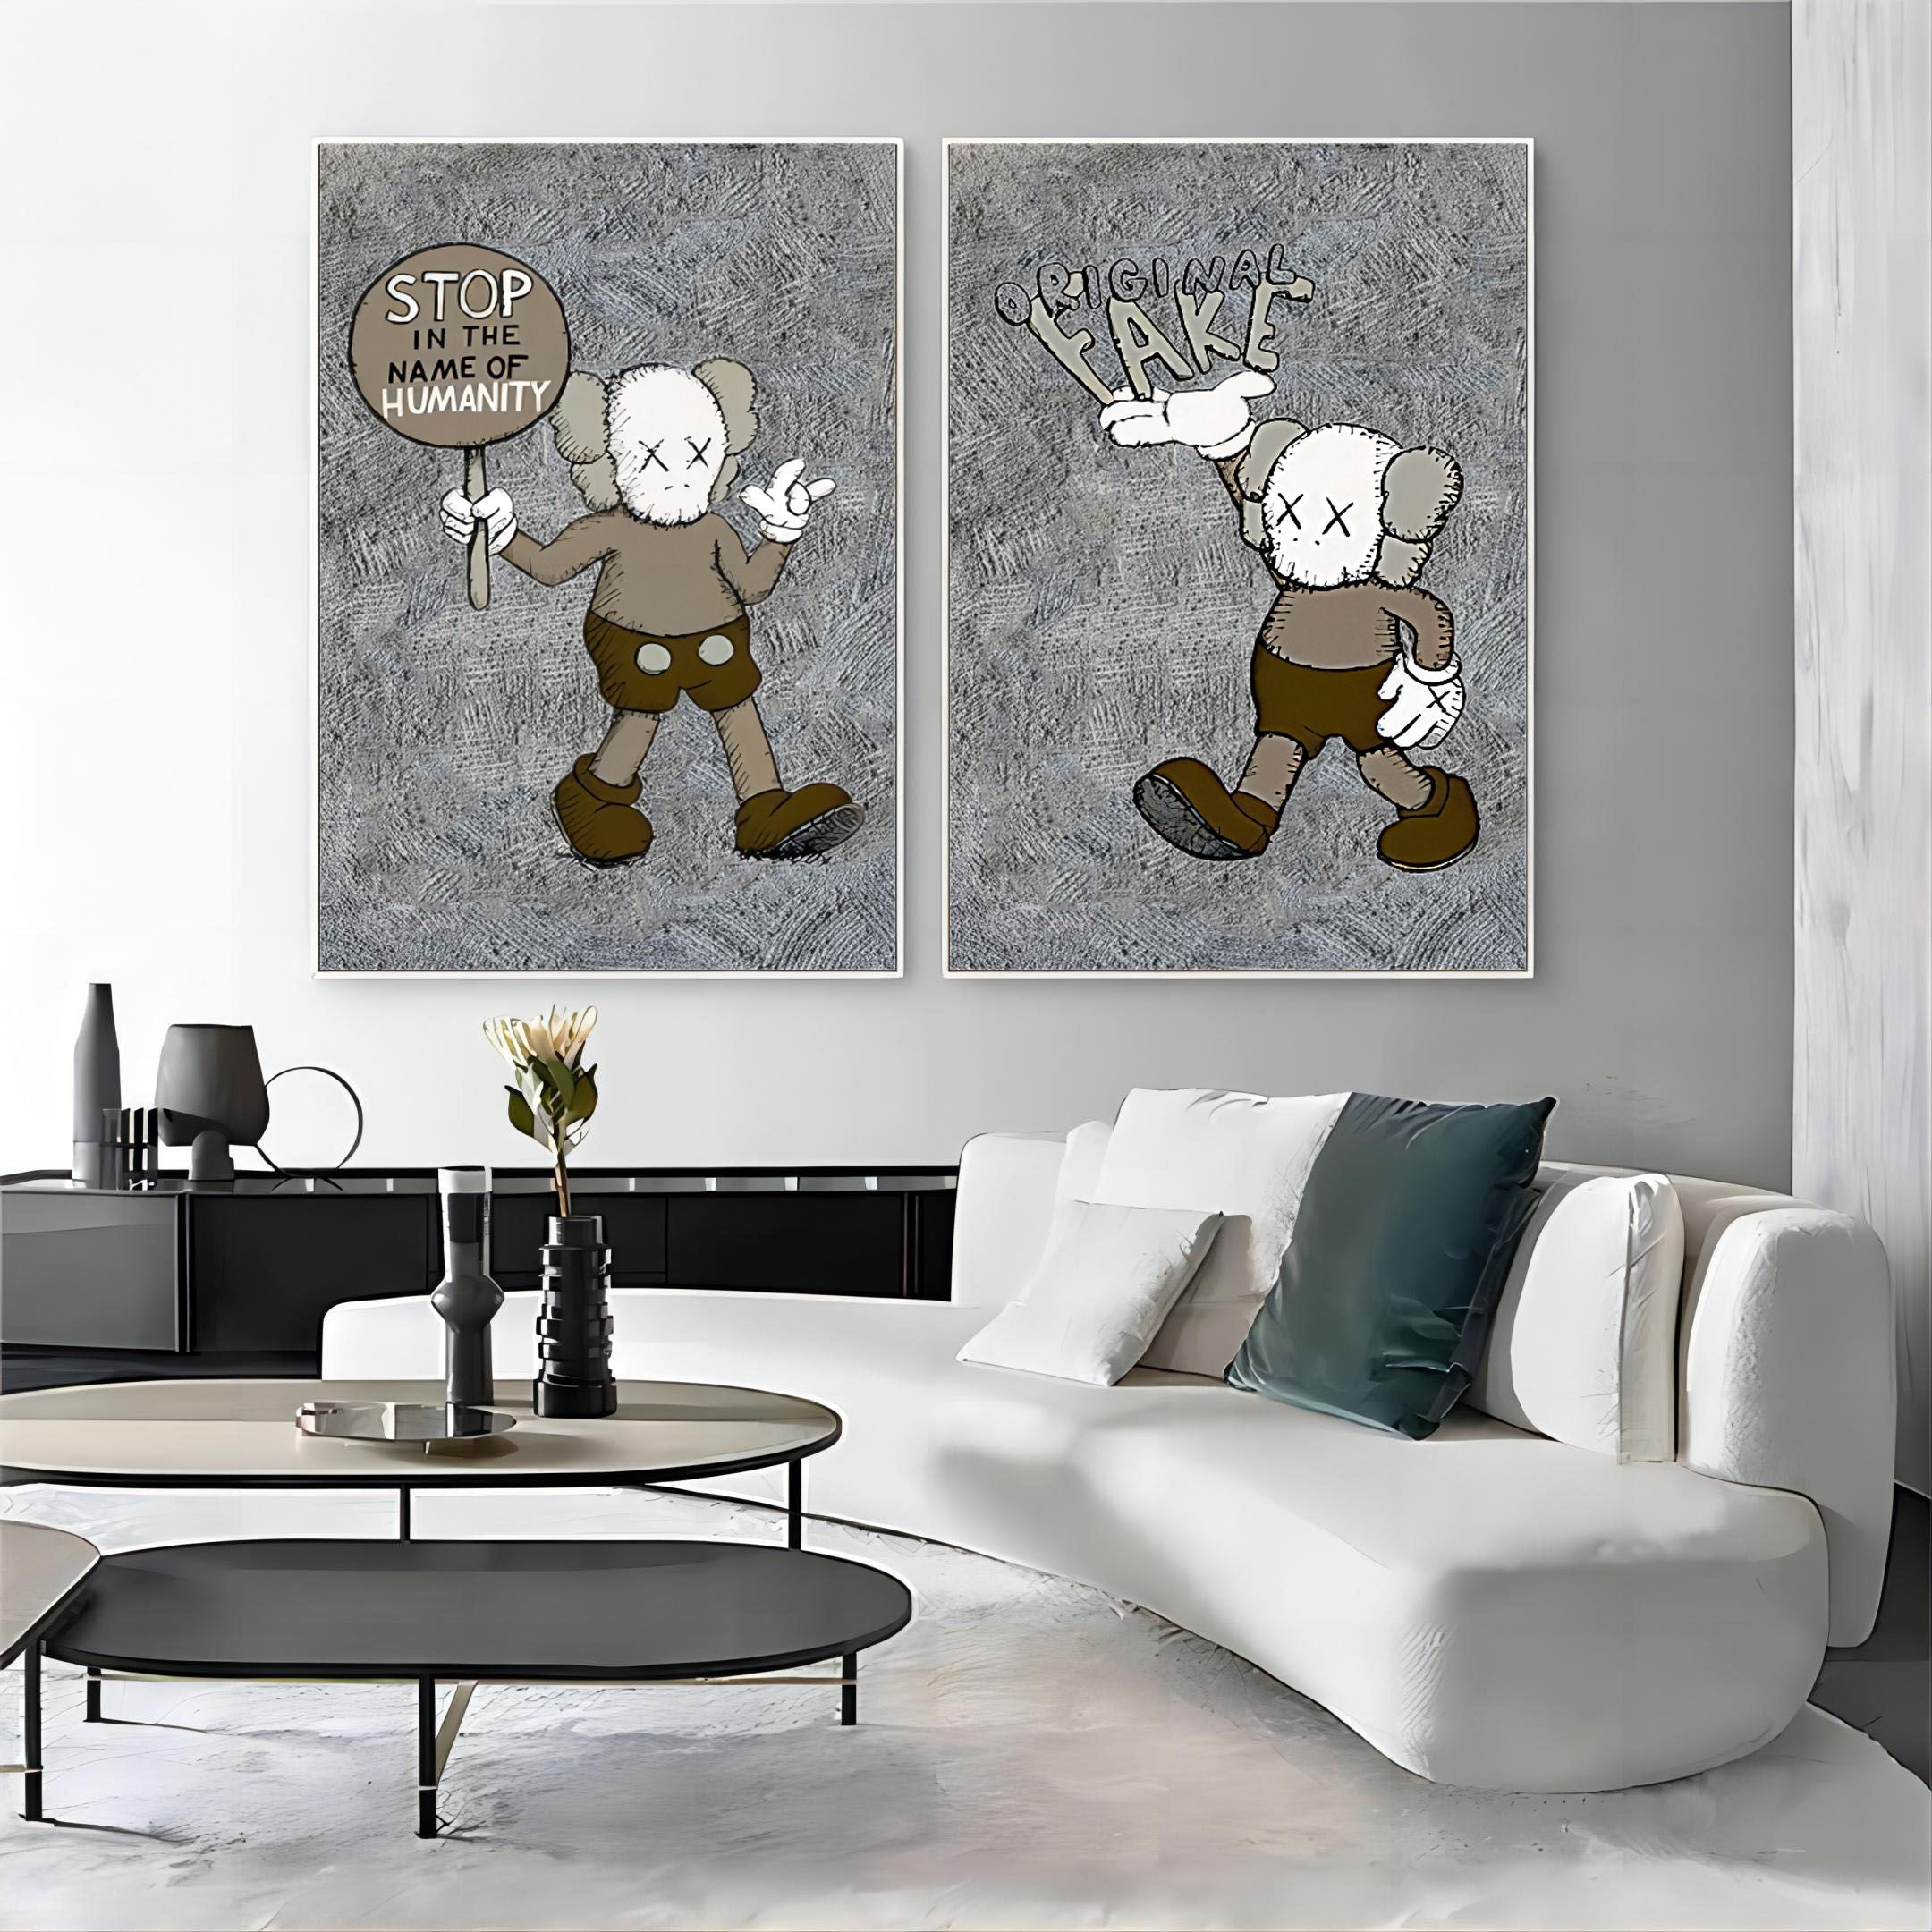 KAWS Painting Set Of 2 #SP001